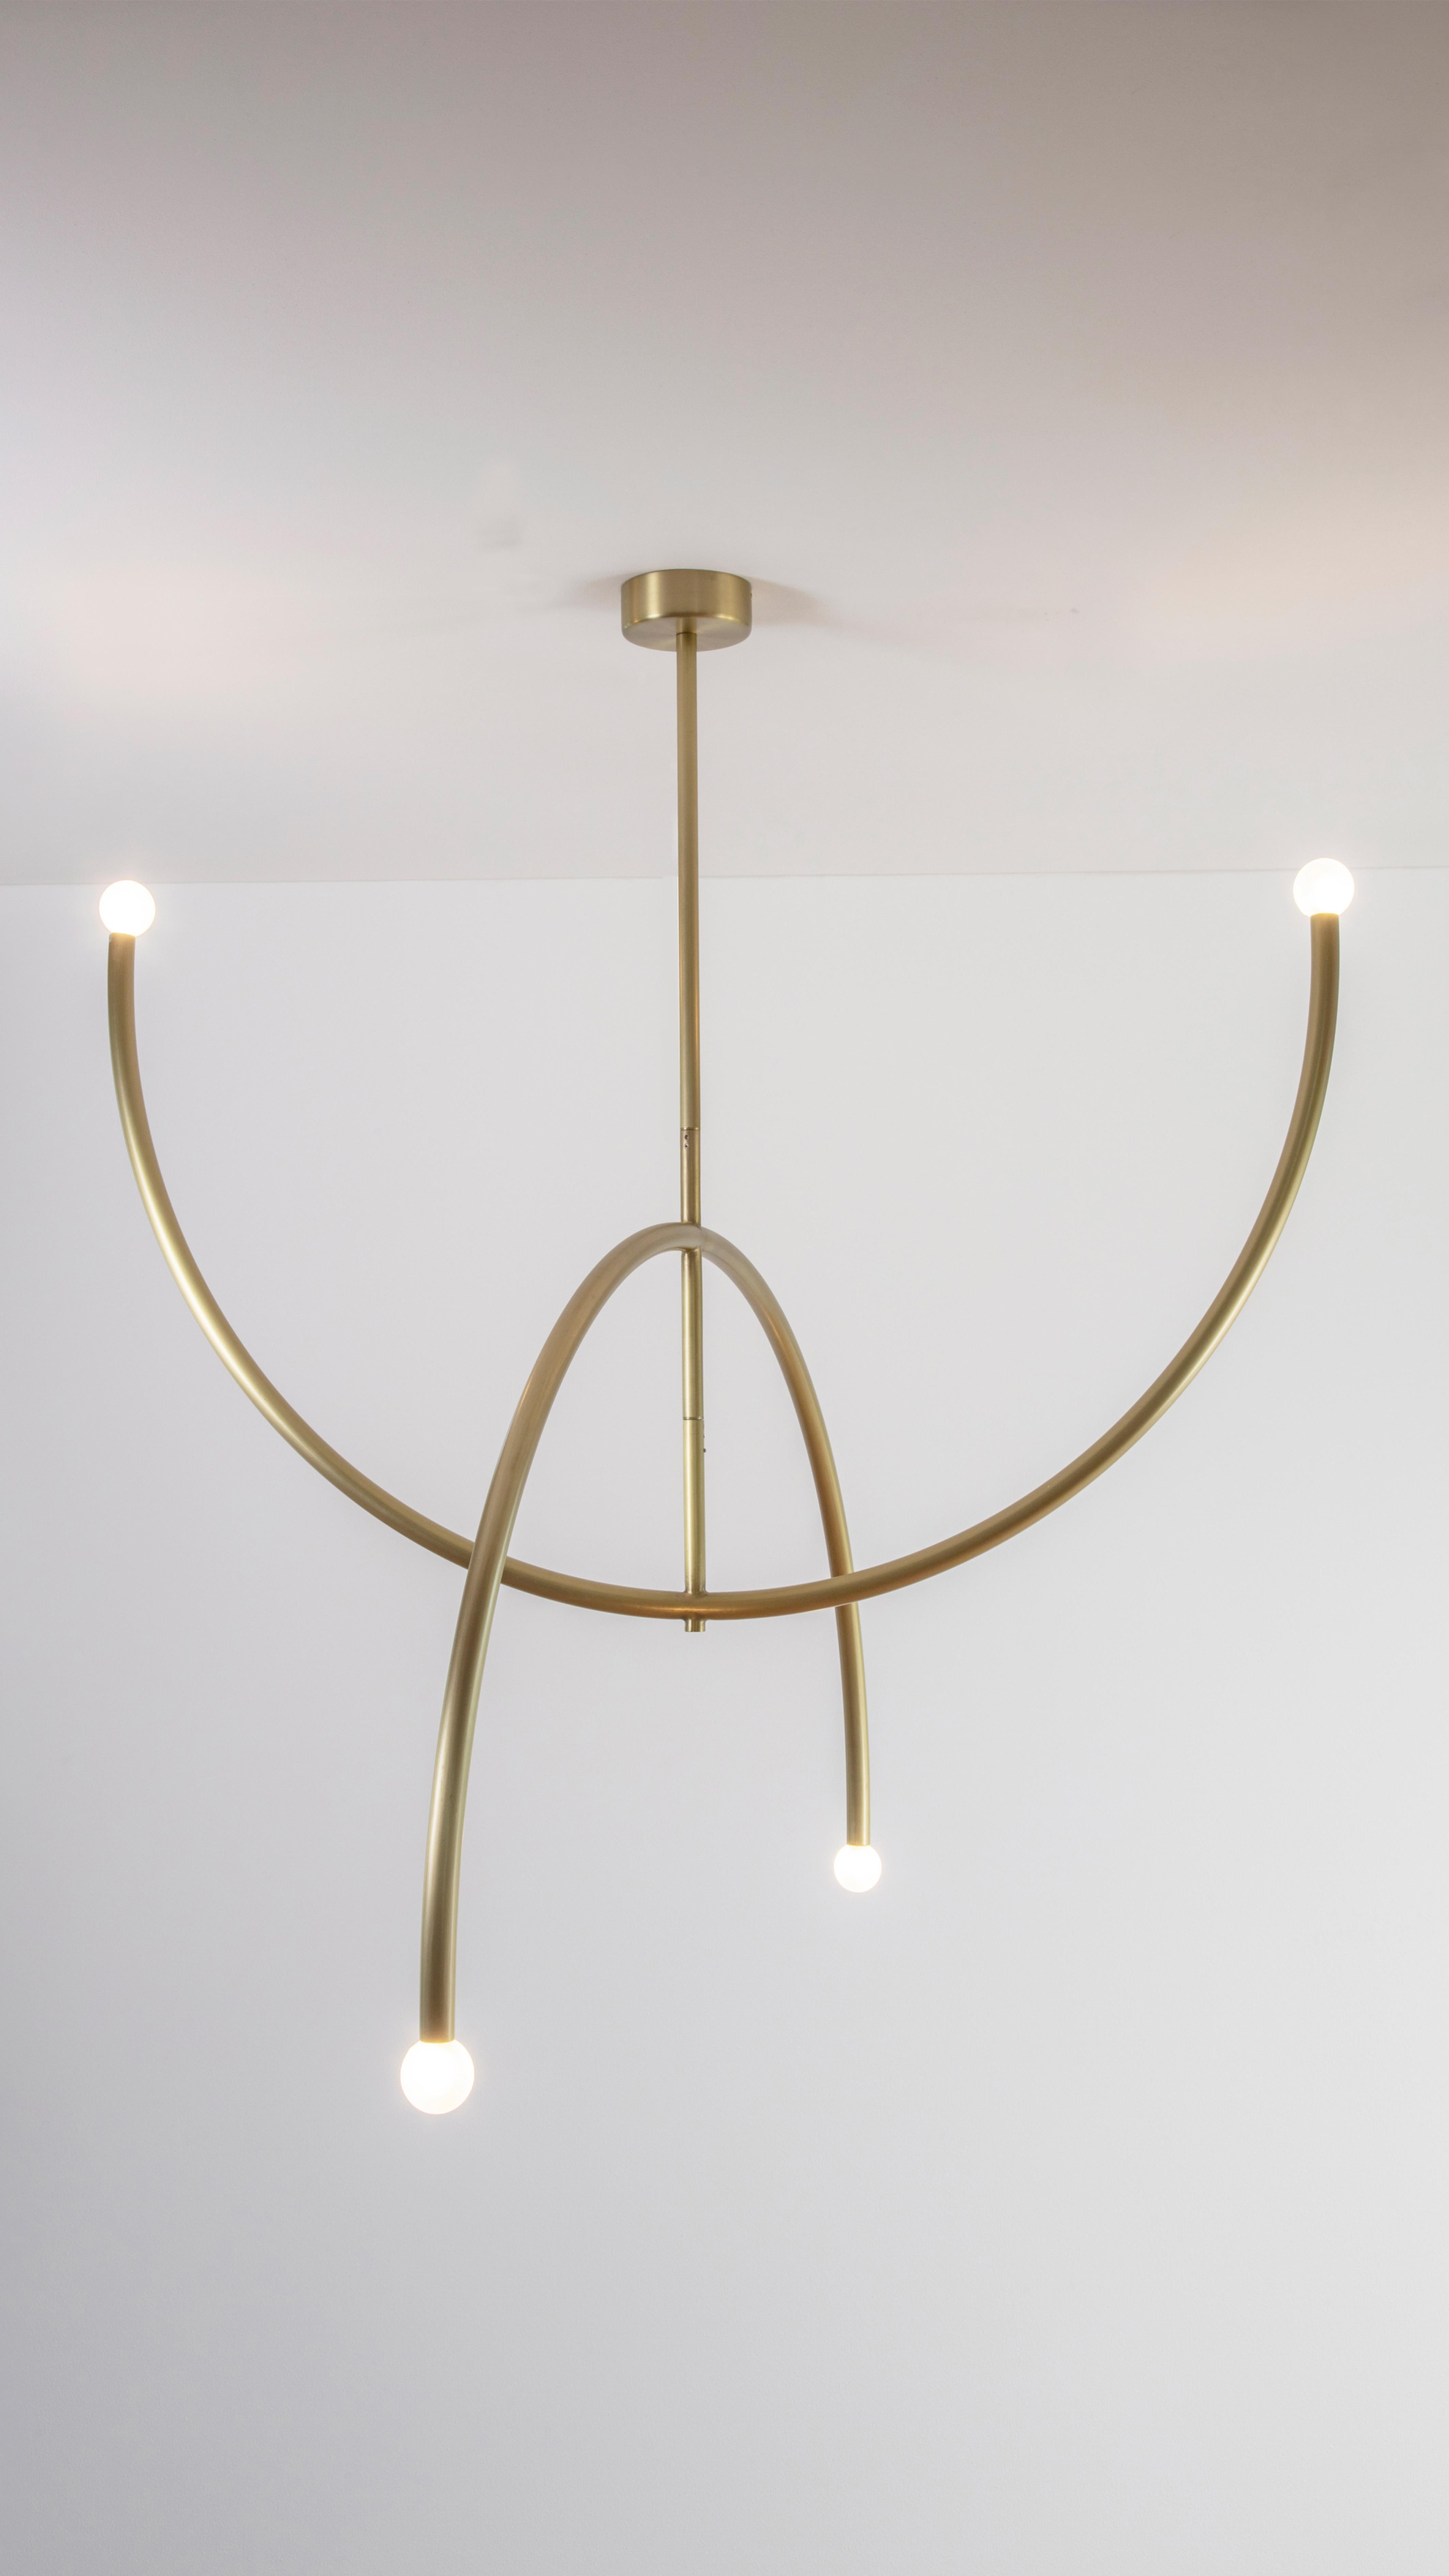 Brass Double Arch Pendant Light by Square in Circle
Dimensions: W115 x H120 x D115 cm
Materials: Brushed brass, white frosted glass globe

This minimal brushed brass pendant light is formed from two arches. Both arches have opaque glass globes at